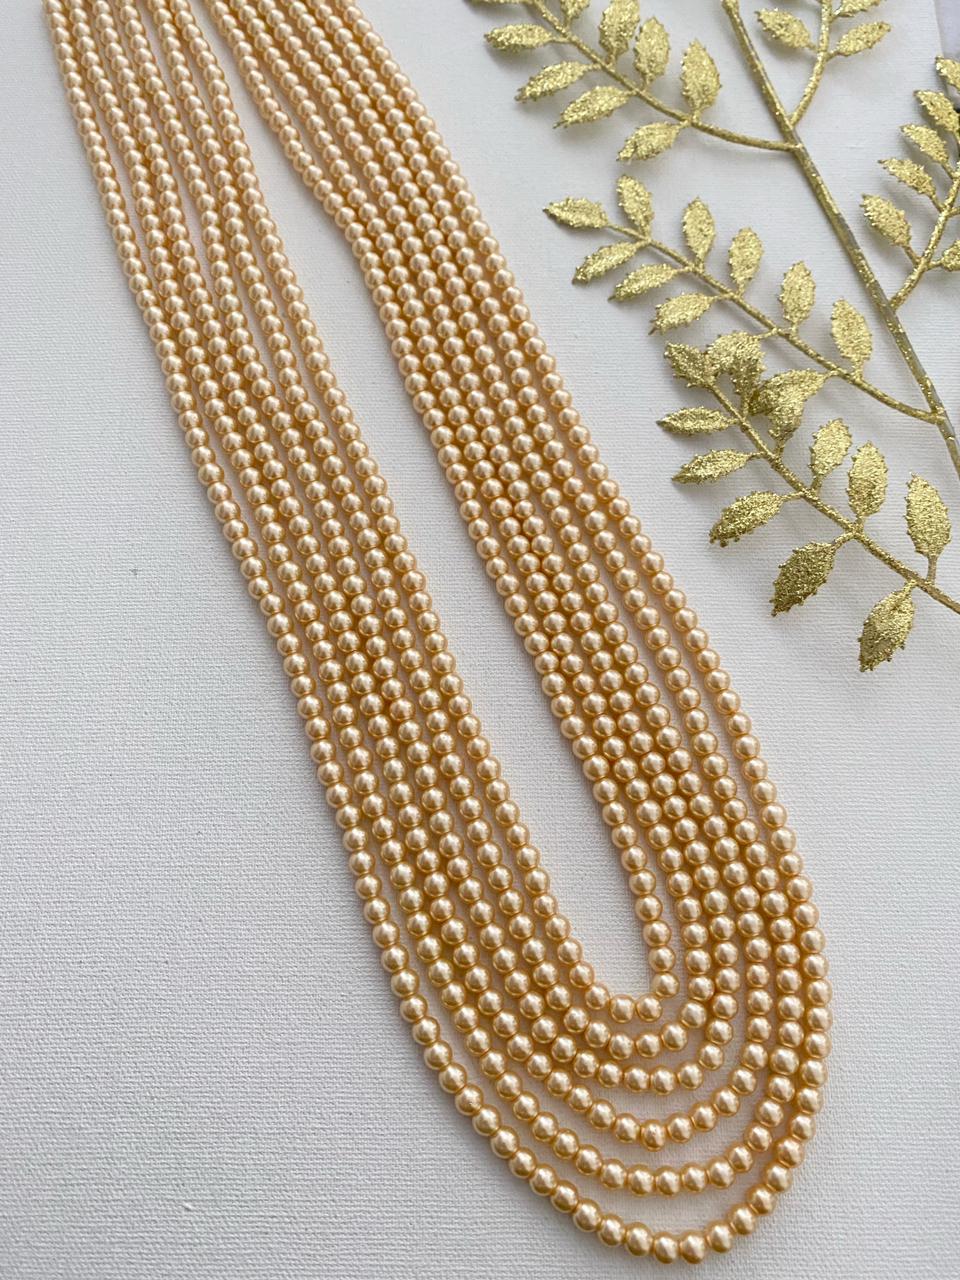 Real Natural Freshwater Pearls Necklace 5-6mm, Gift Pearl Necklace men and  women | eBay